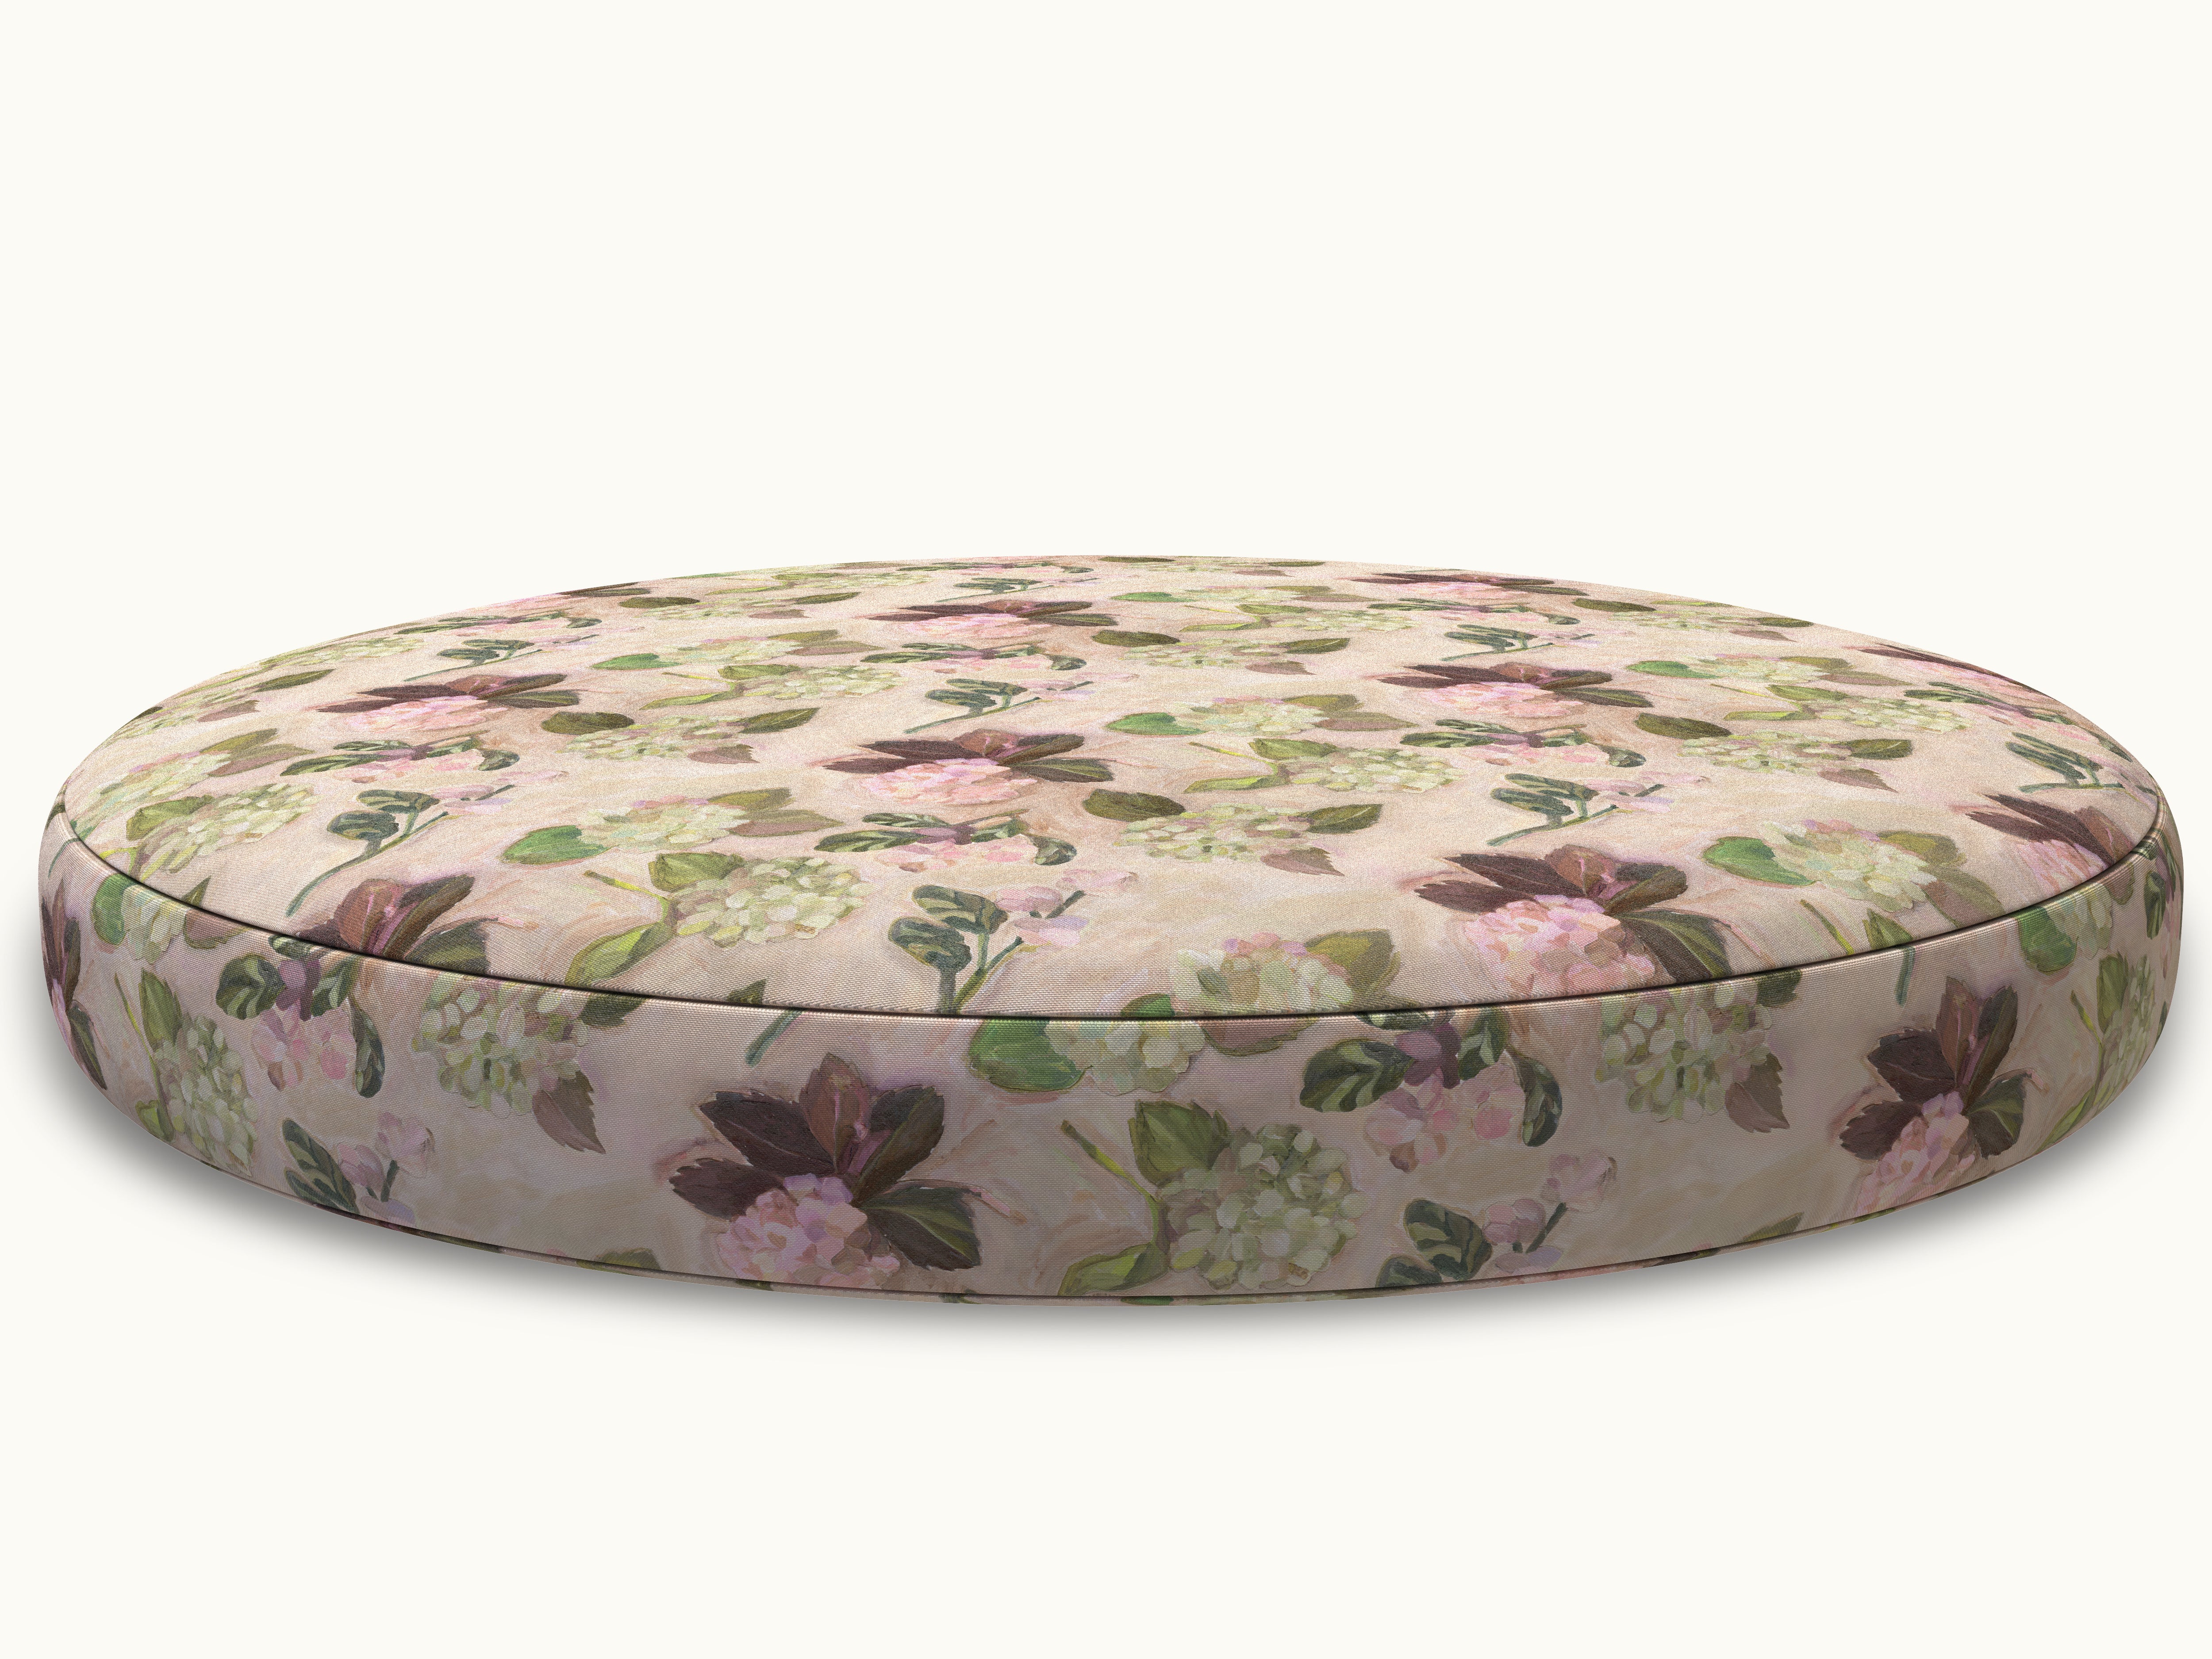 Test Floor Cushion with Delilah fabric